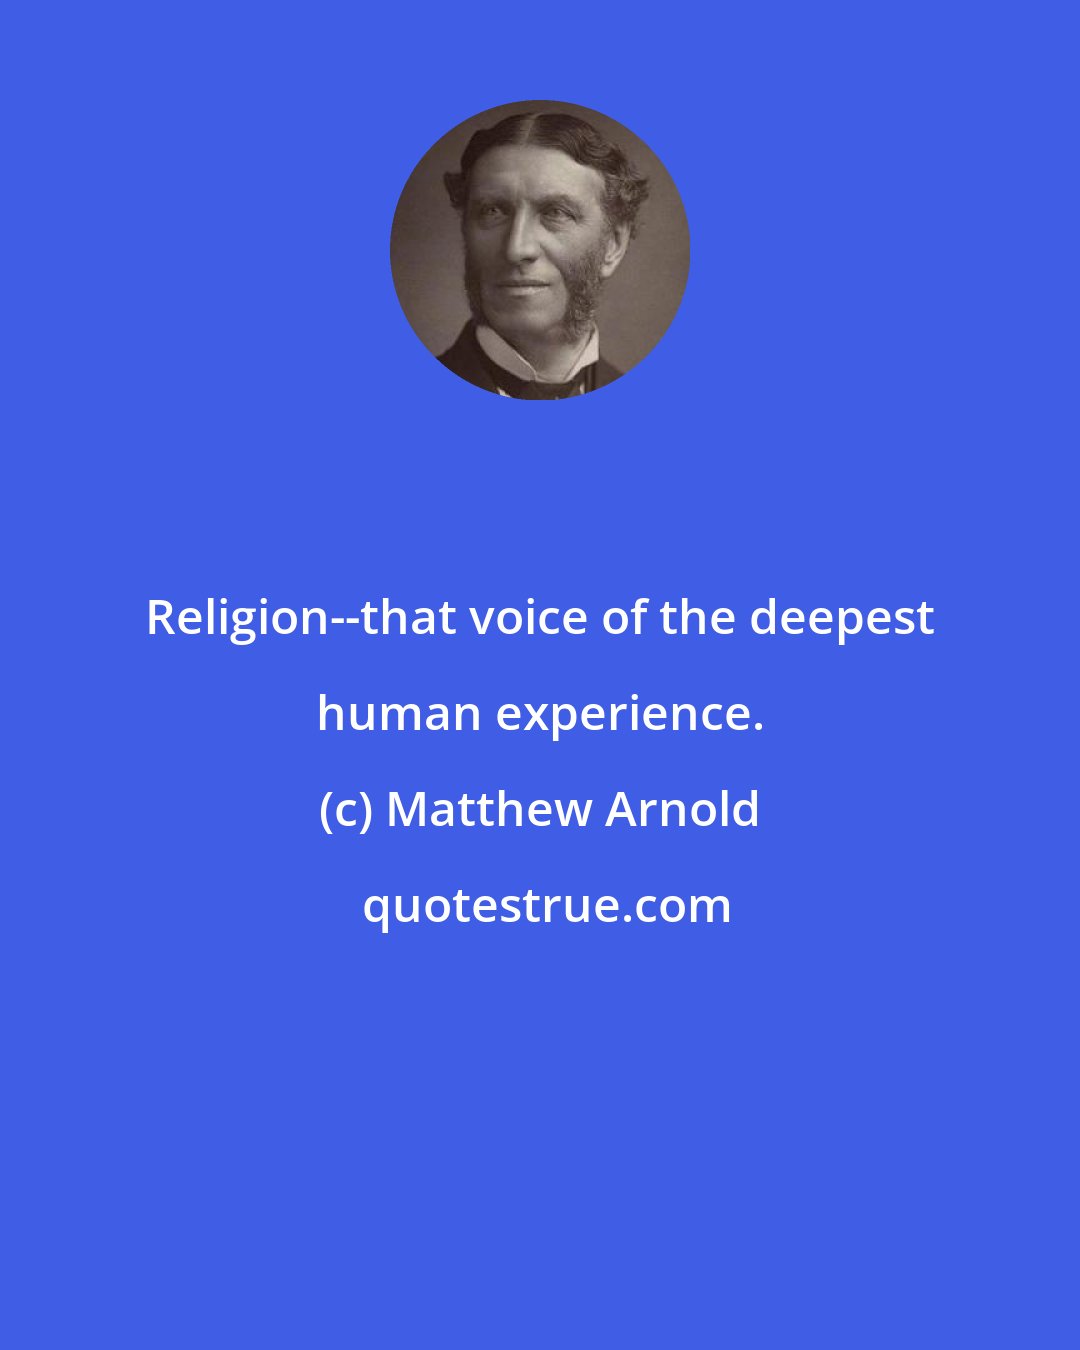 Matthew Arnold: Religion--that voice of the deepest human experience.